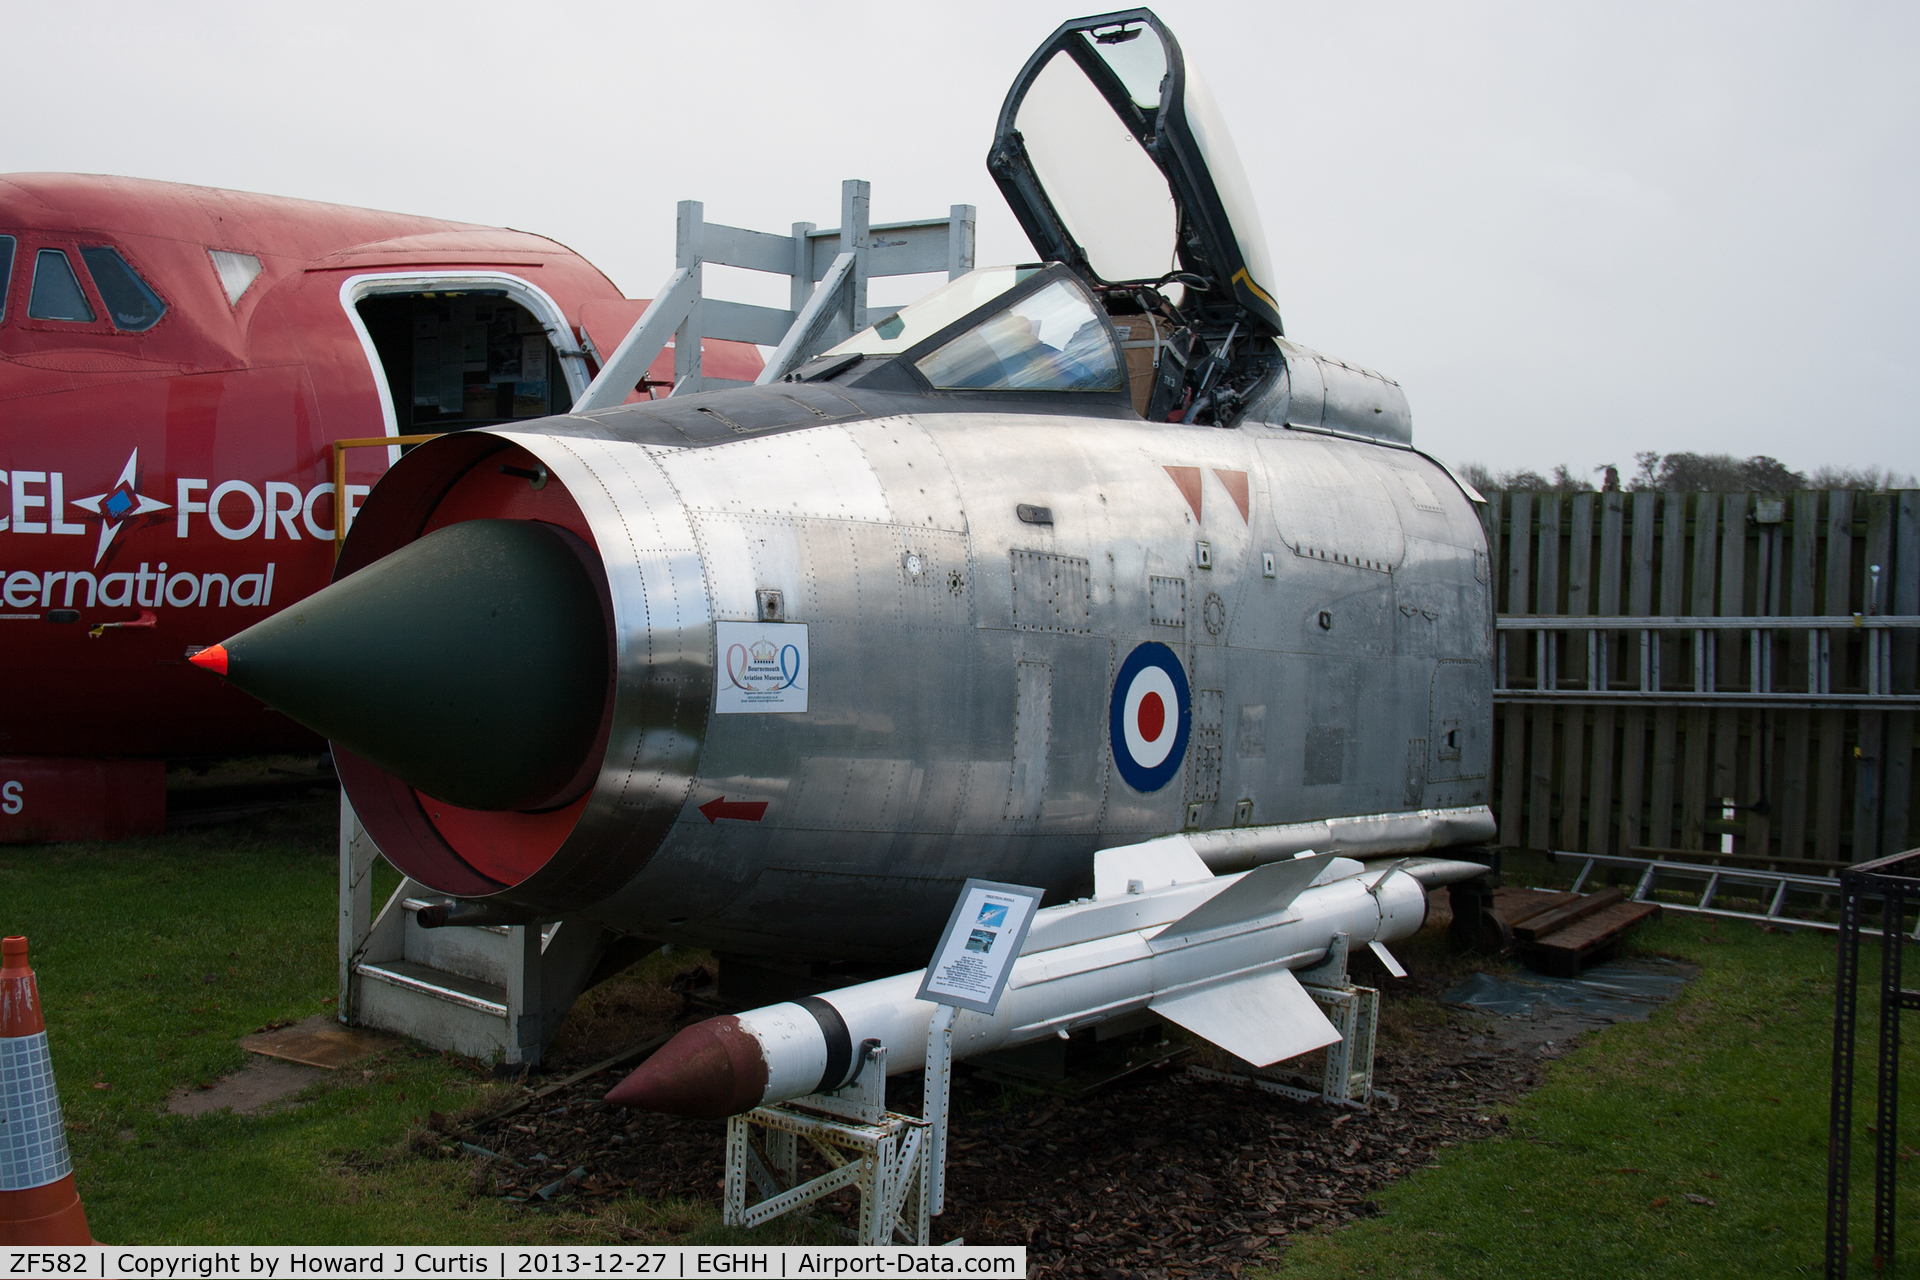 ZF582, English Electric Lightning F.53 C/N 95281, Nose only. On display at the Bournemouth Aviation Museum.